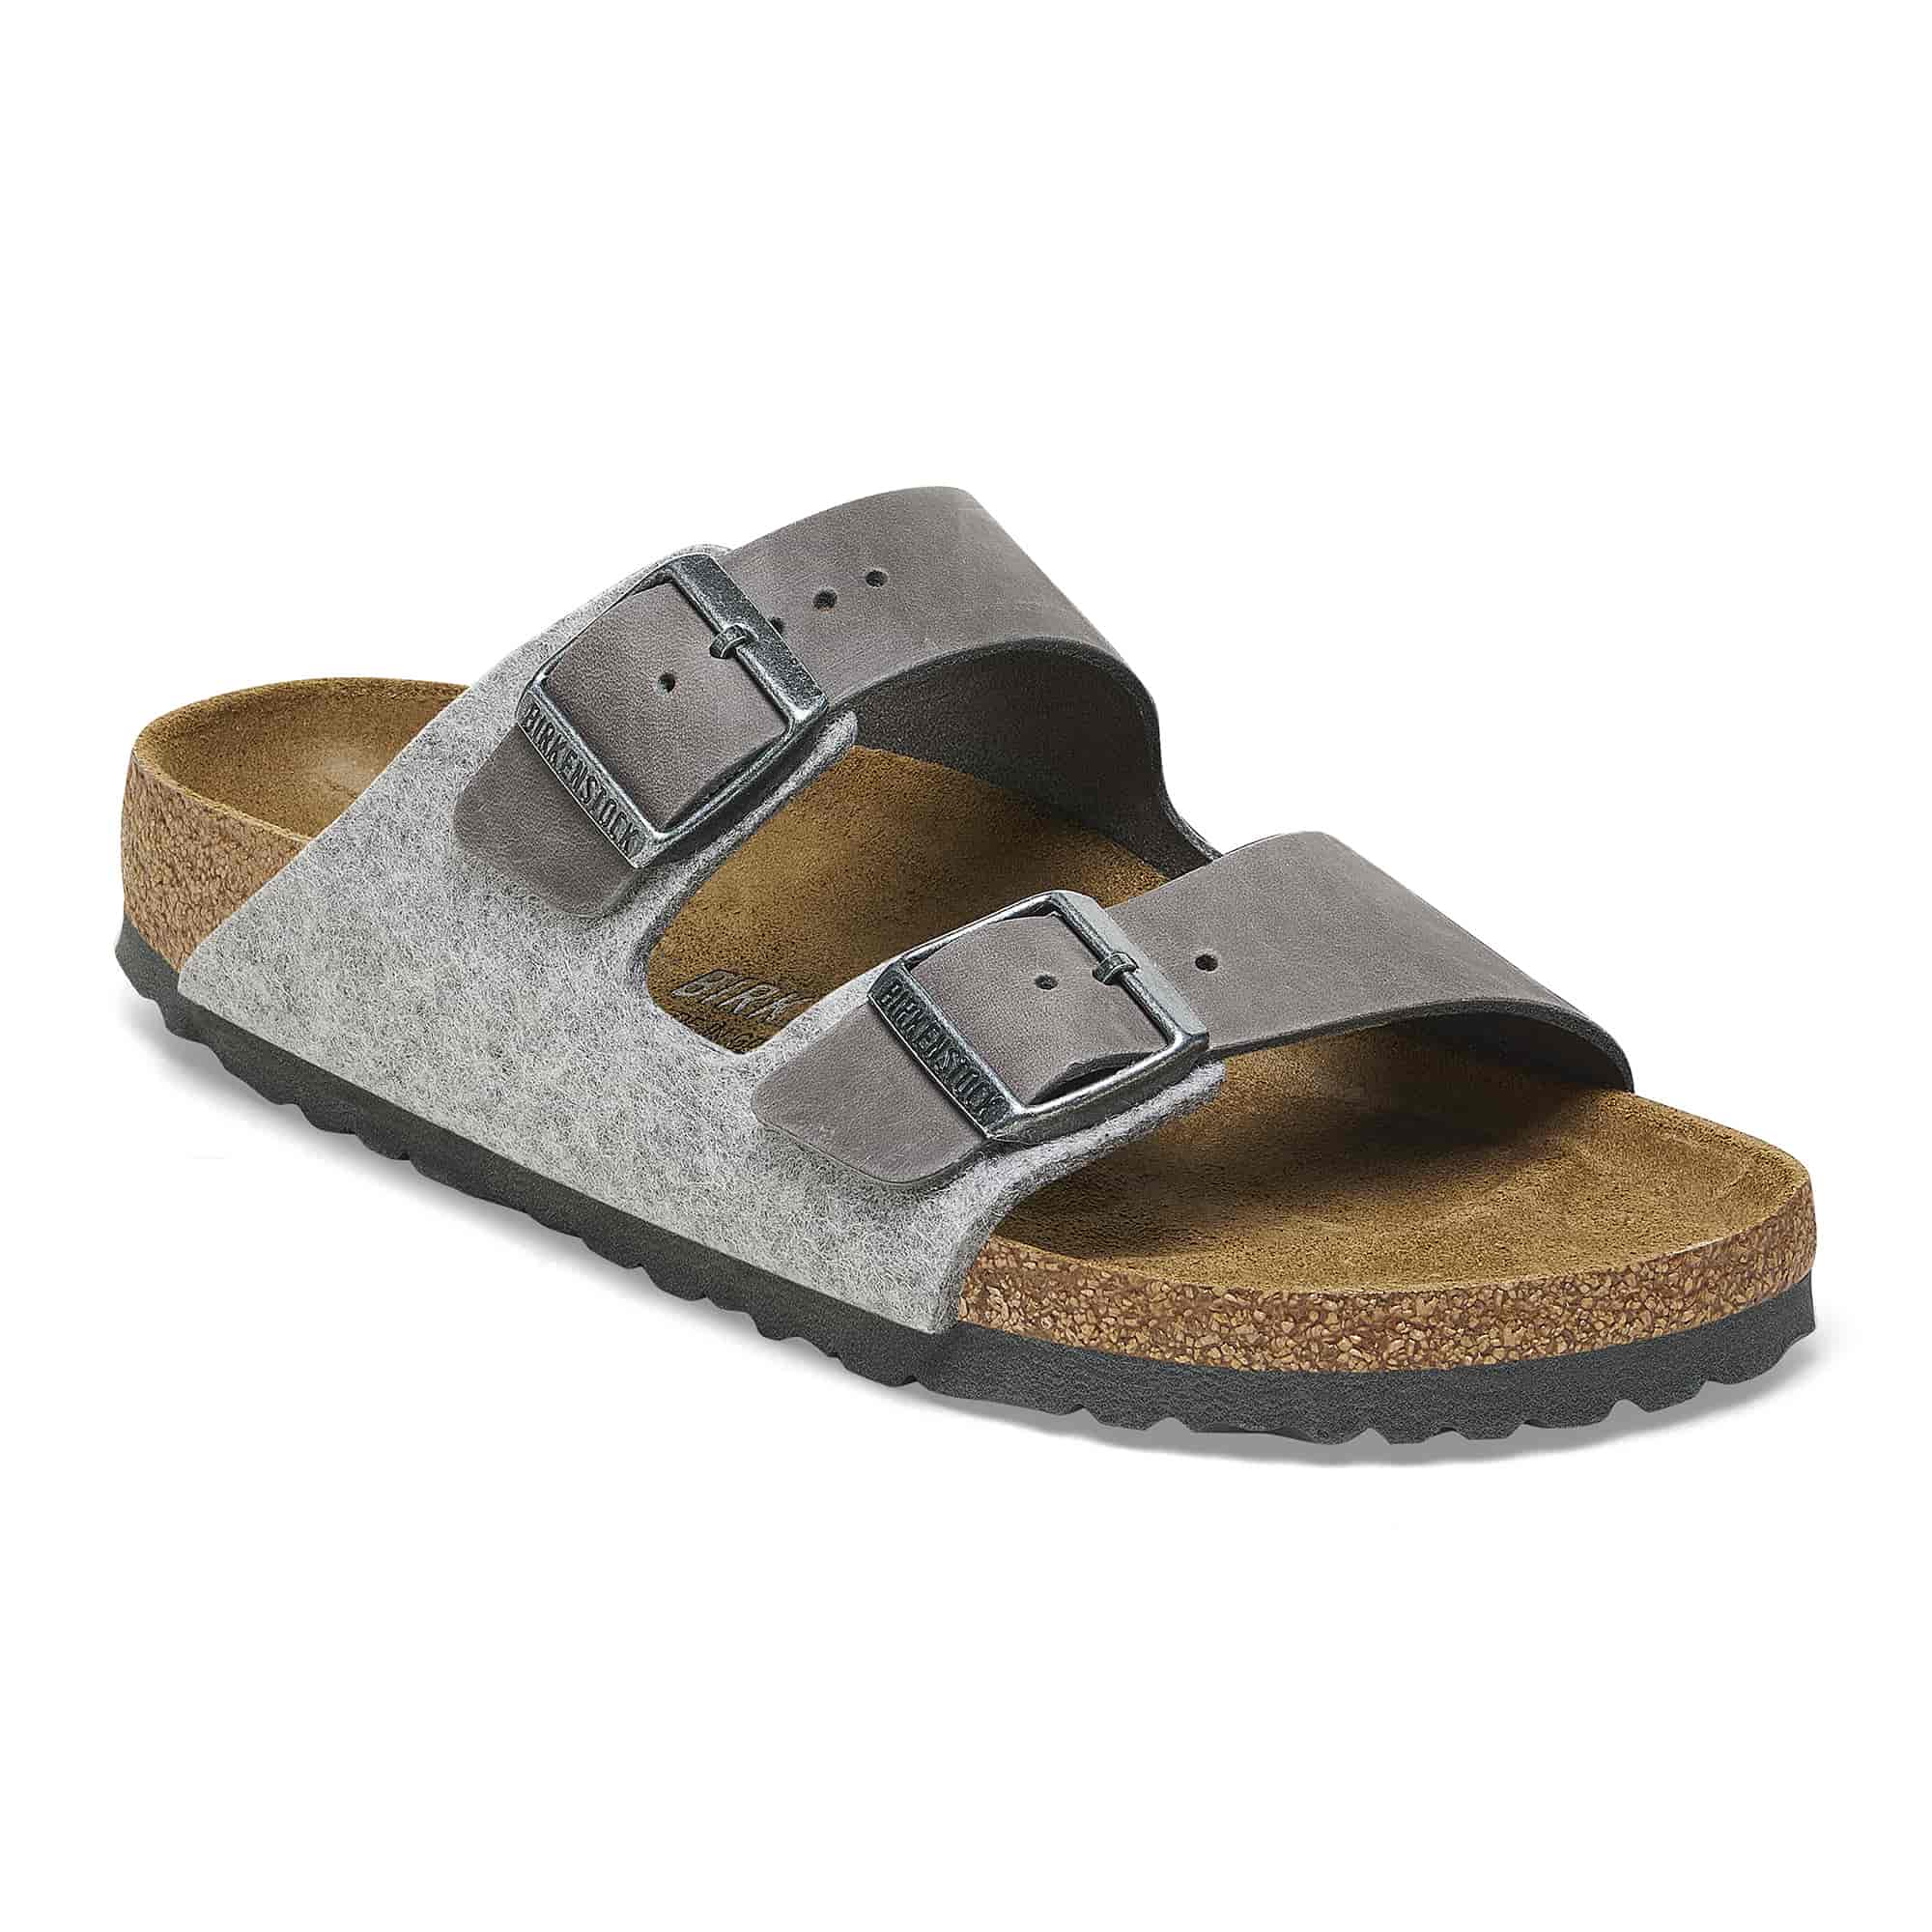 Dropship Women's Buckle Belt Flat Mules; Closed Toe Non-slip Sole Clog  Slippers; Casual Walking Shoes to Sell Online at a Lower Price | Doba